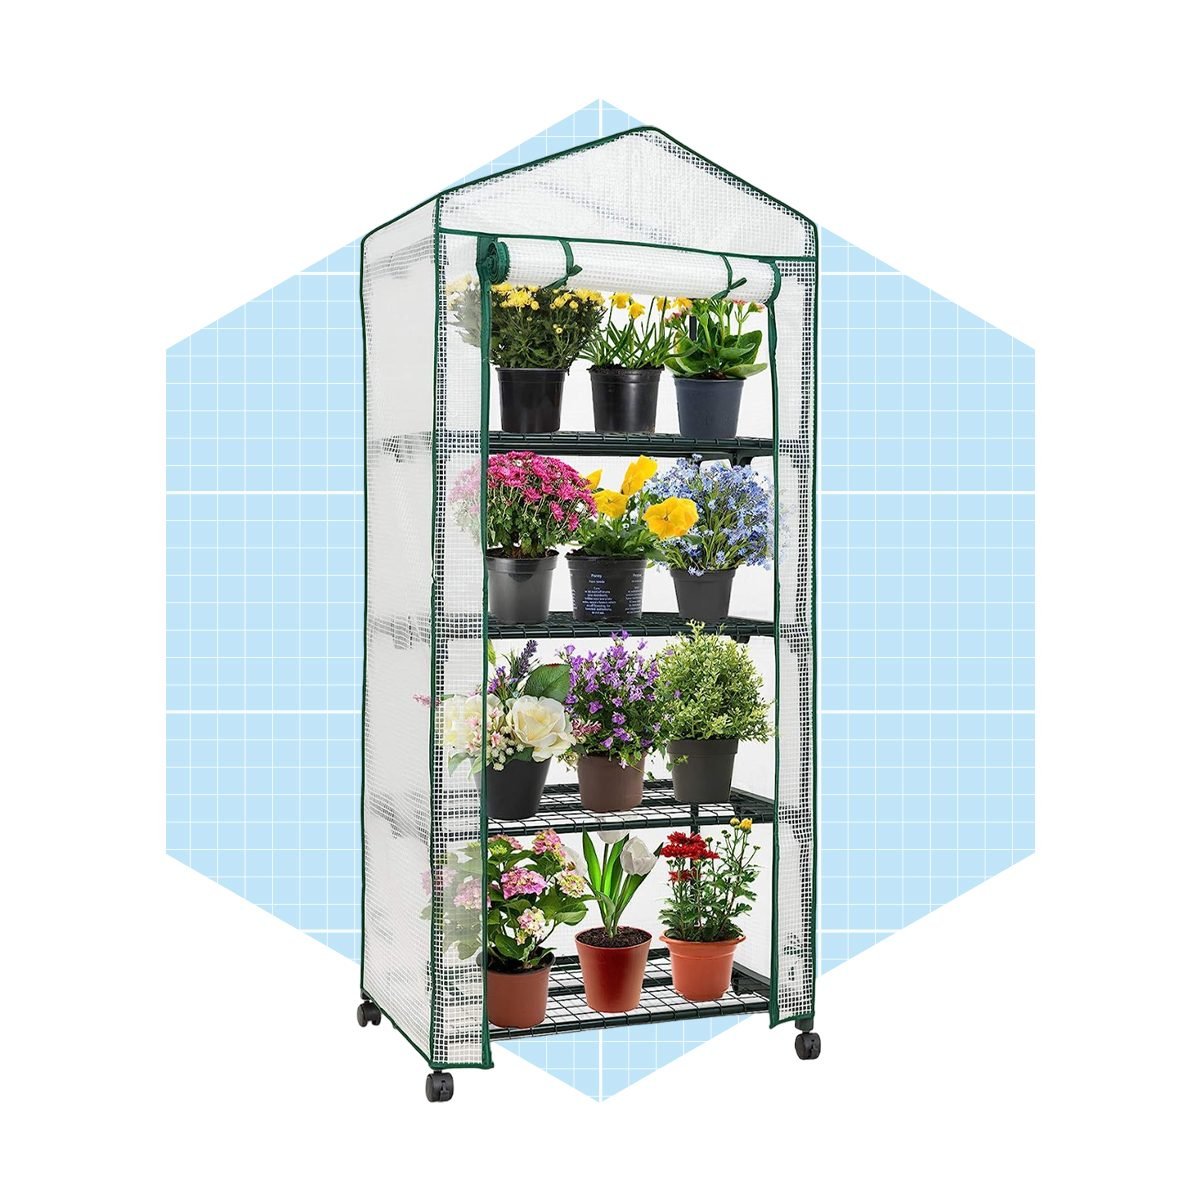 8 Best Portable Greenhouses | The Family Handyman